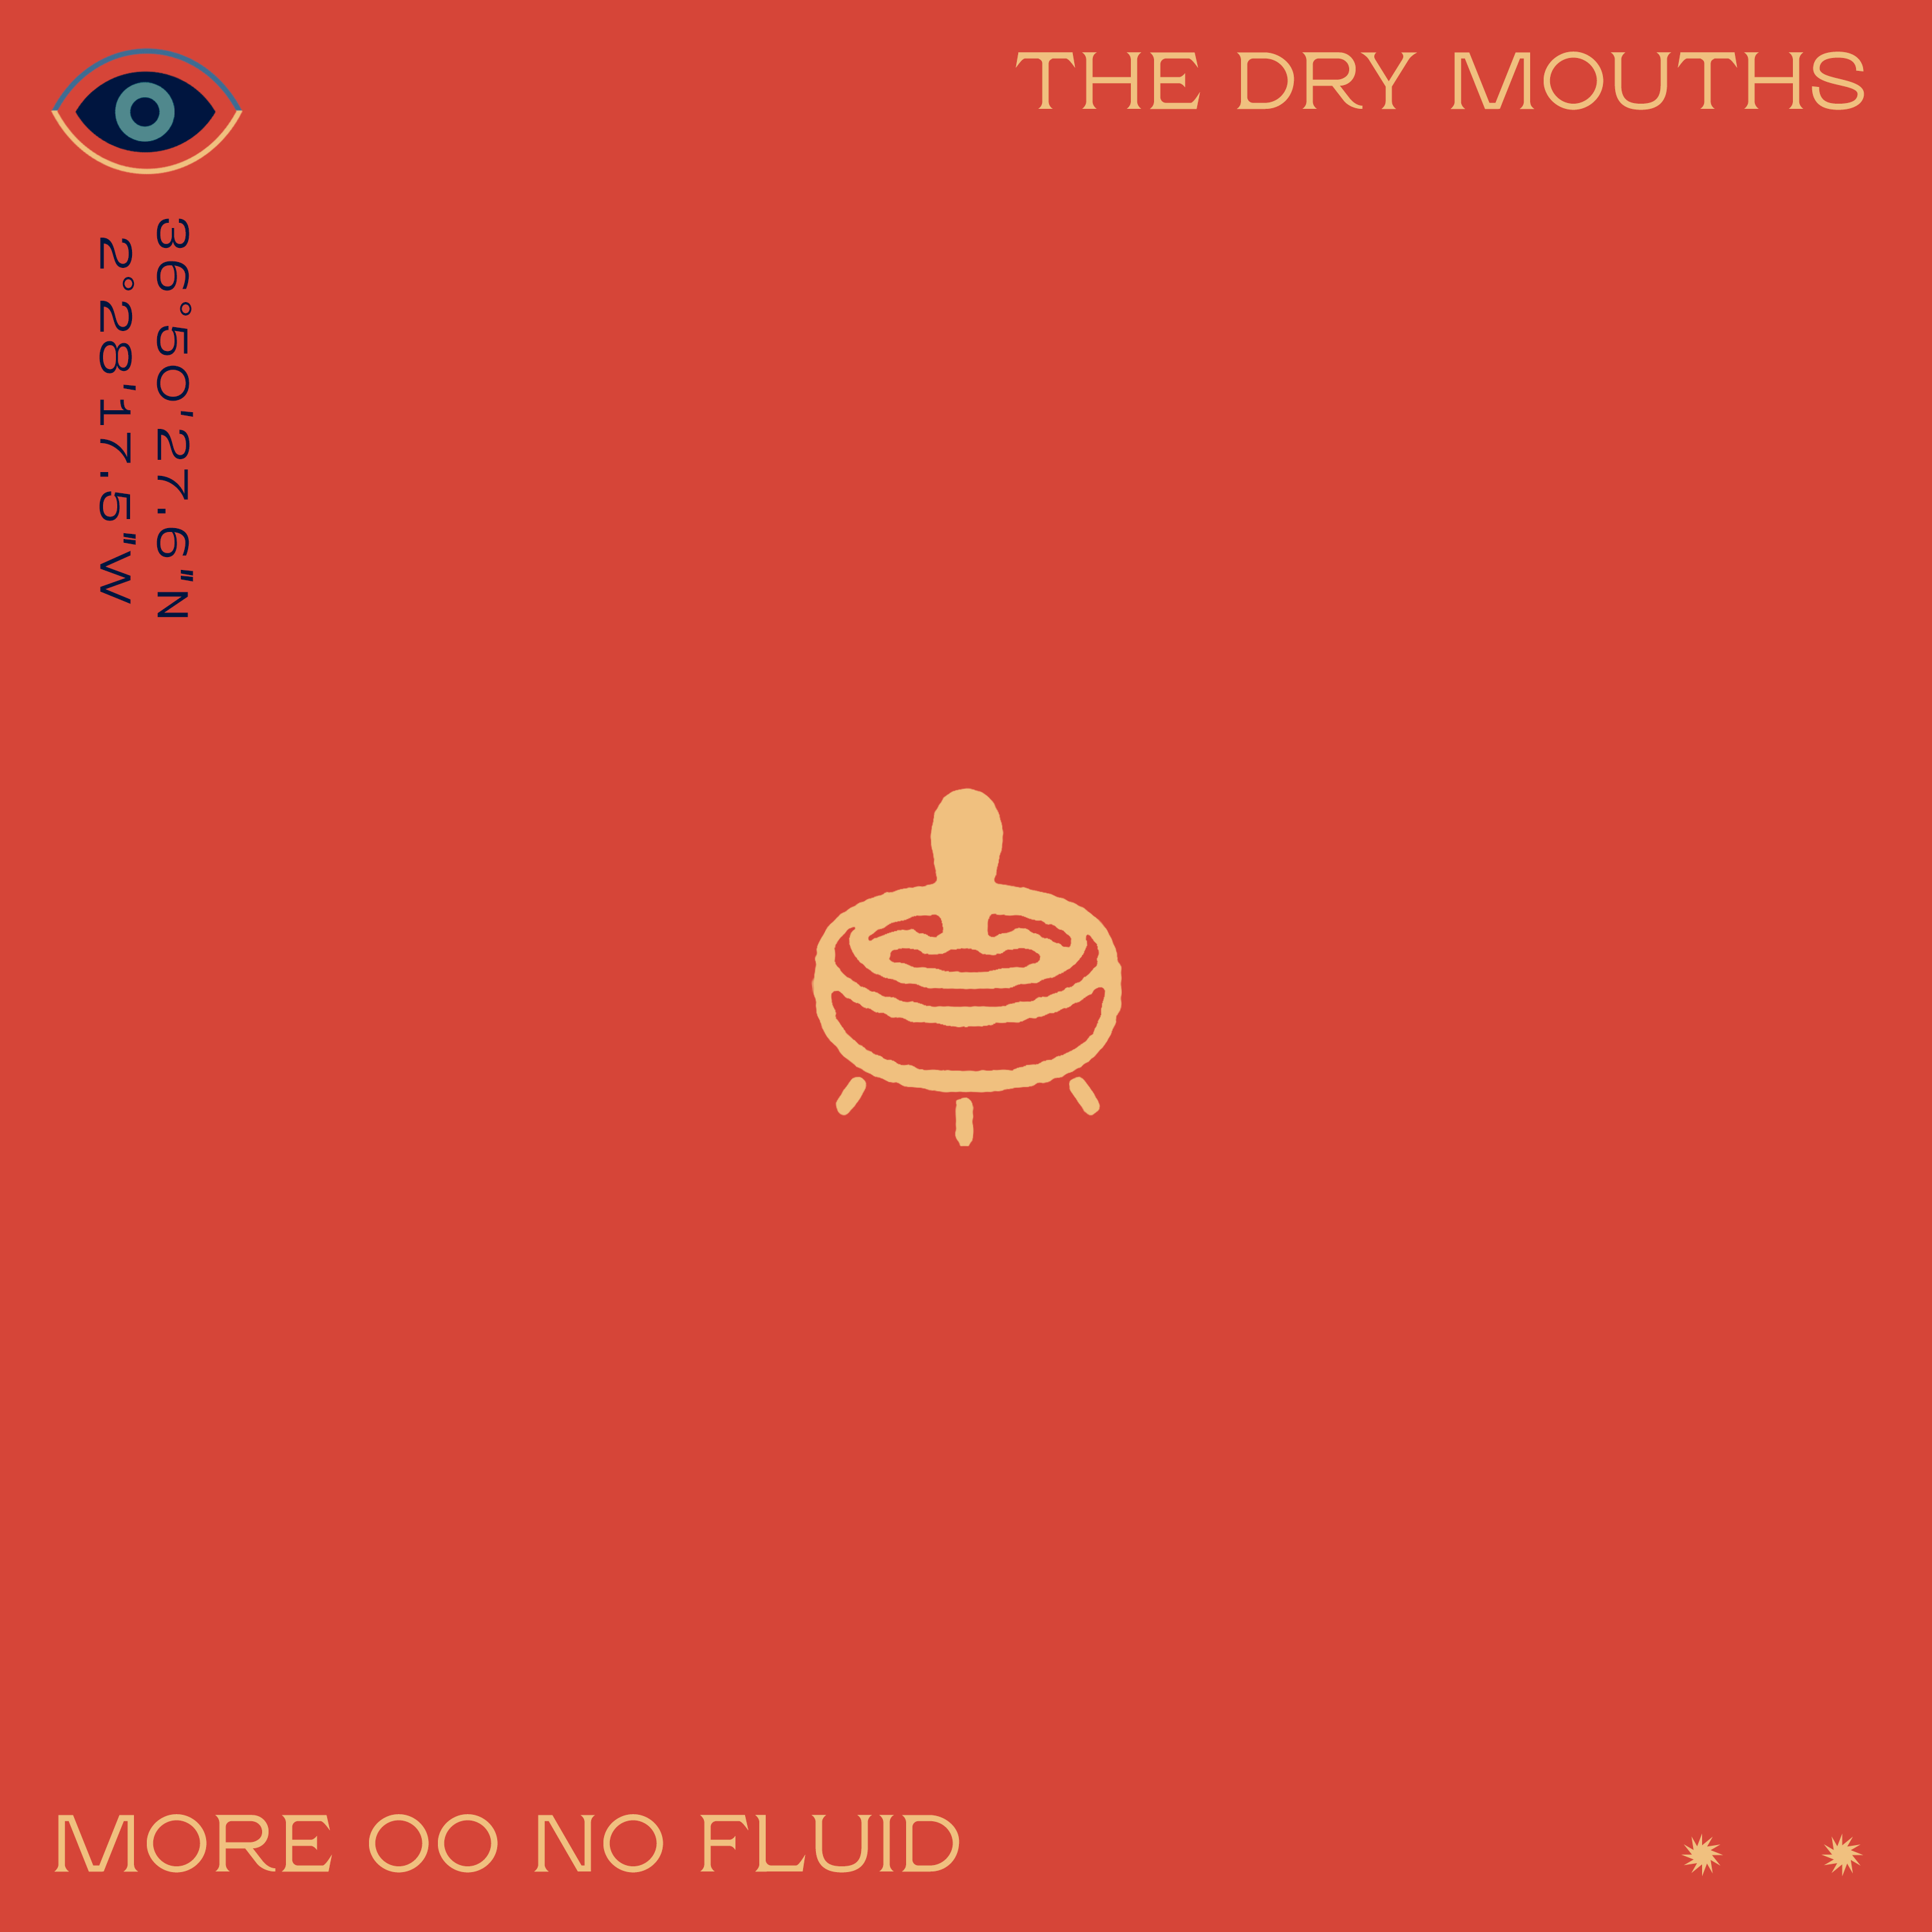 The Dry Mouths more oo no fluid